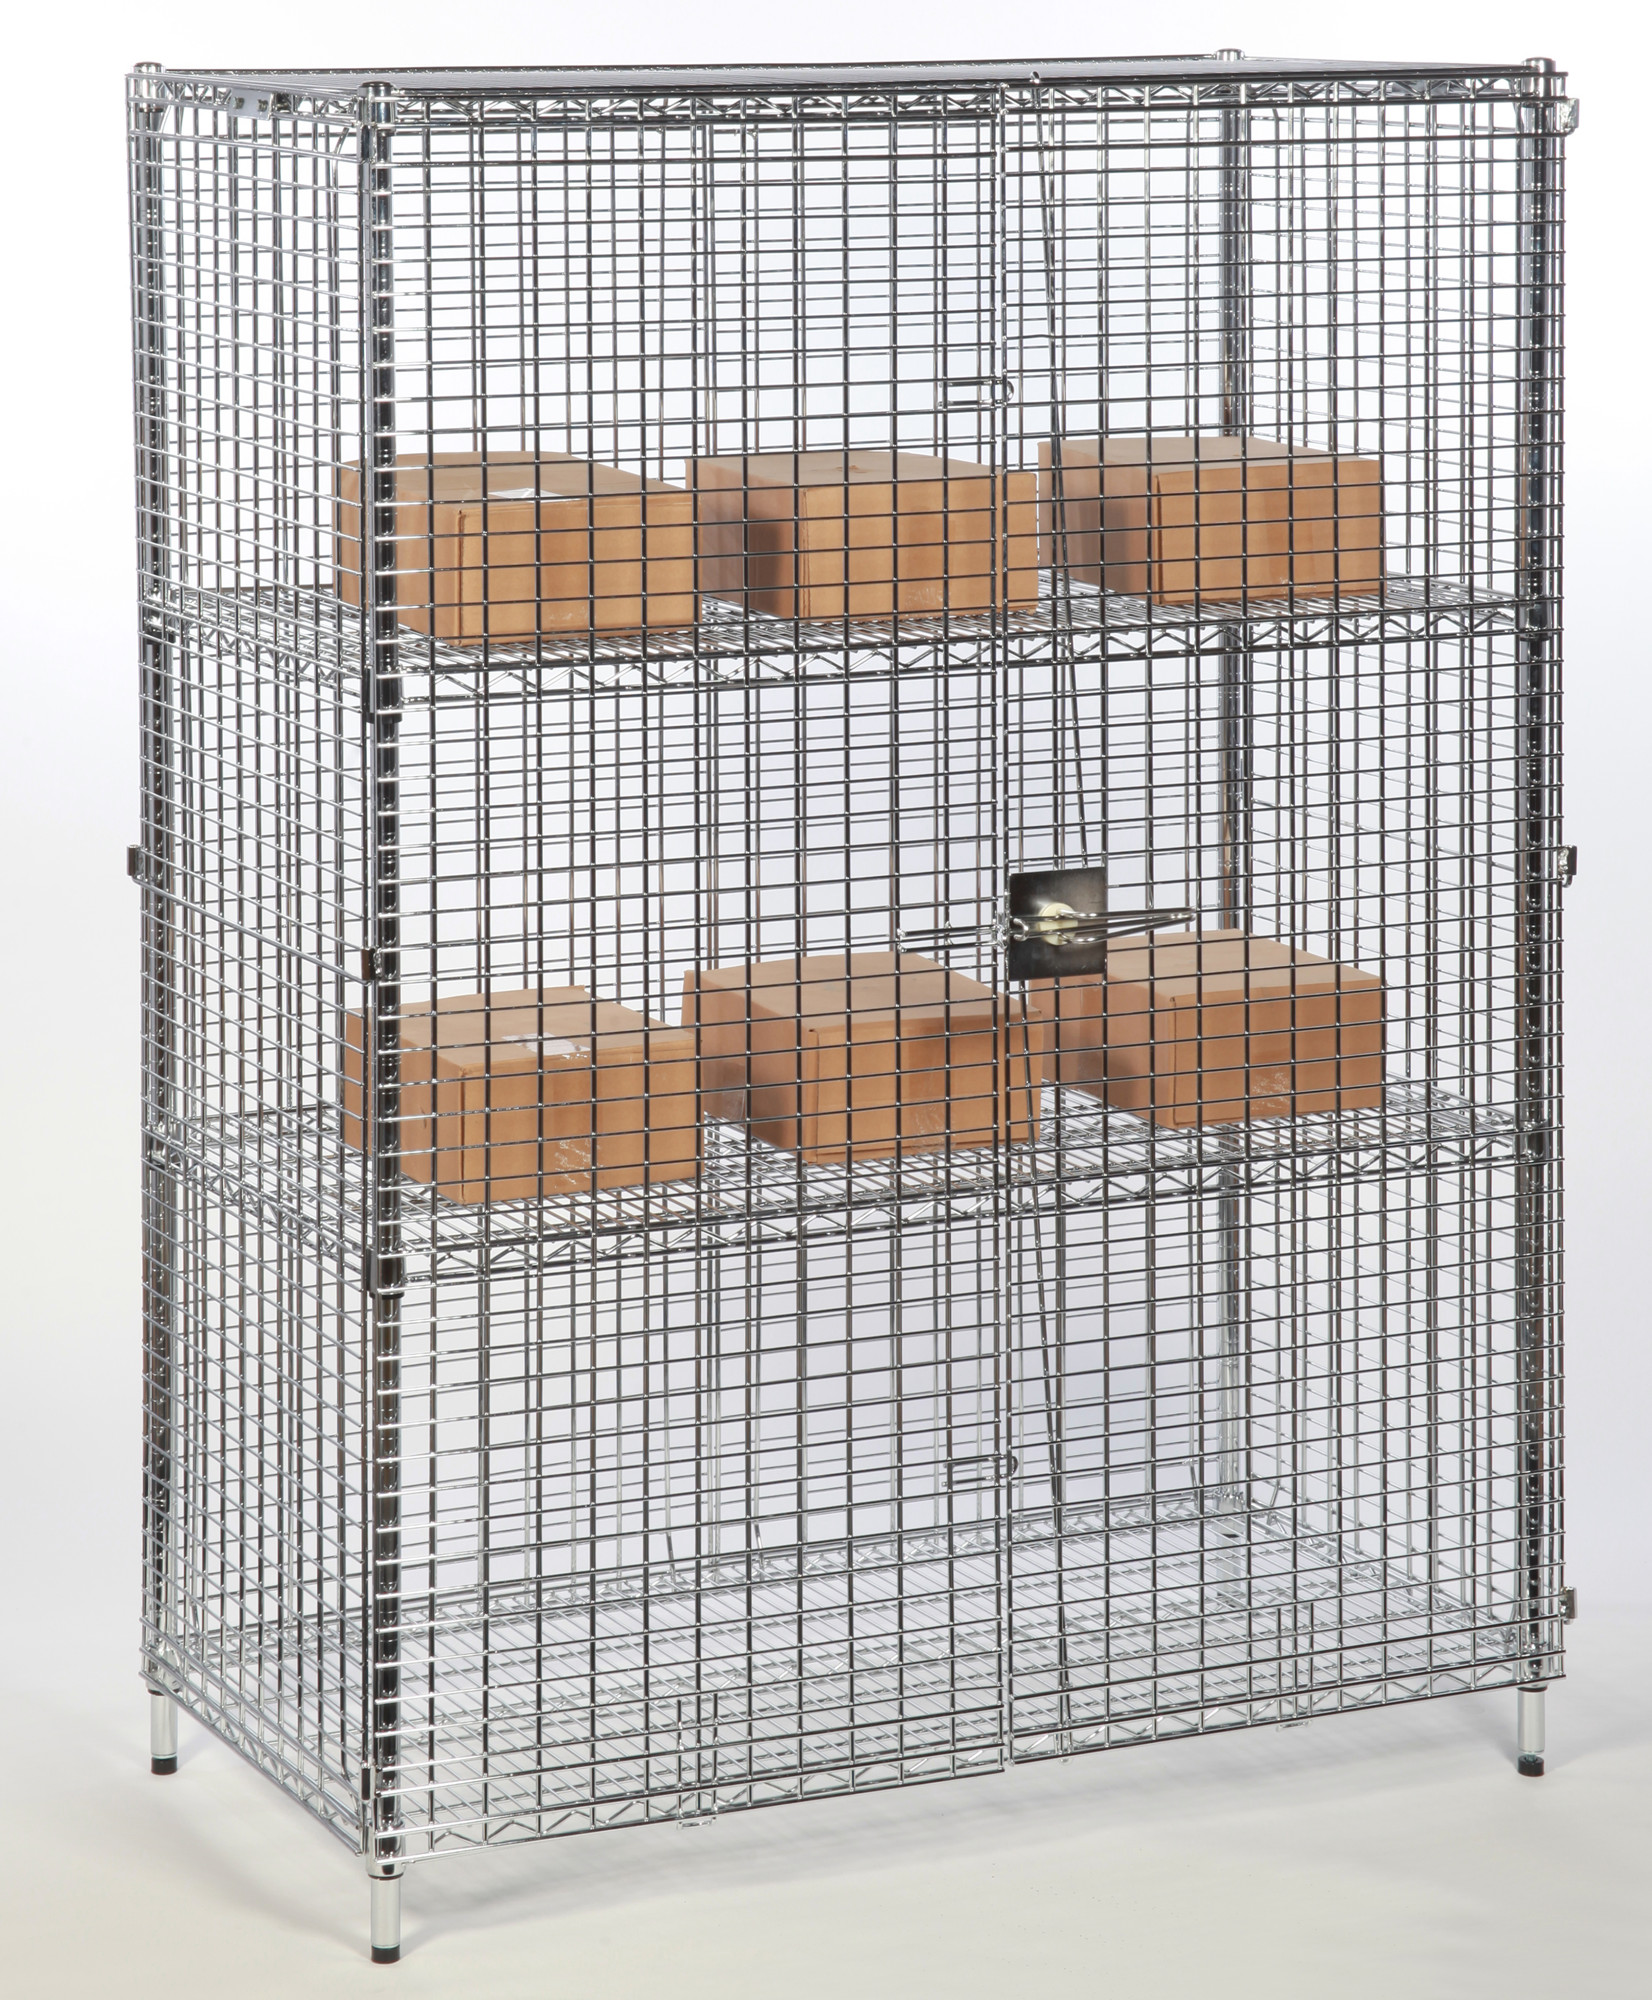 Mobile Chrome Mesh Security Cages - chrome shelving cage static